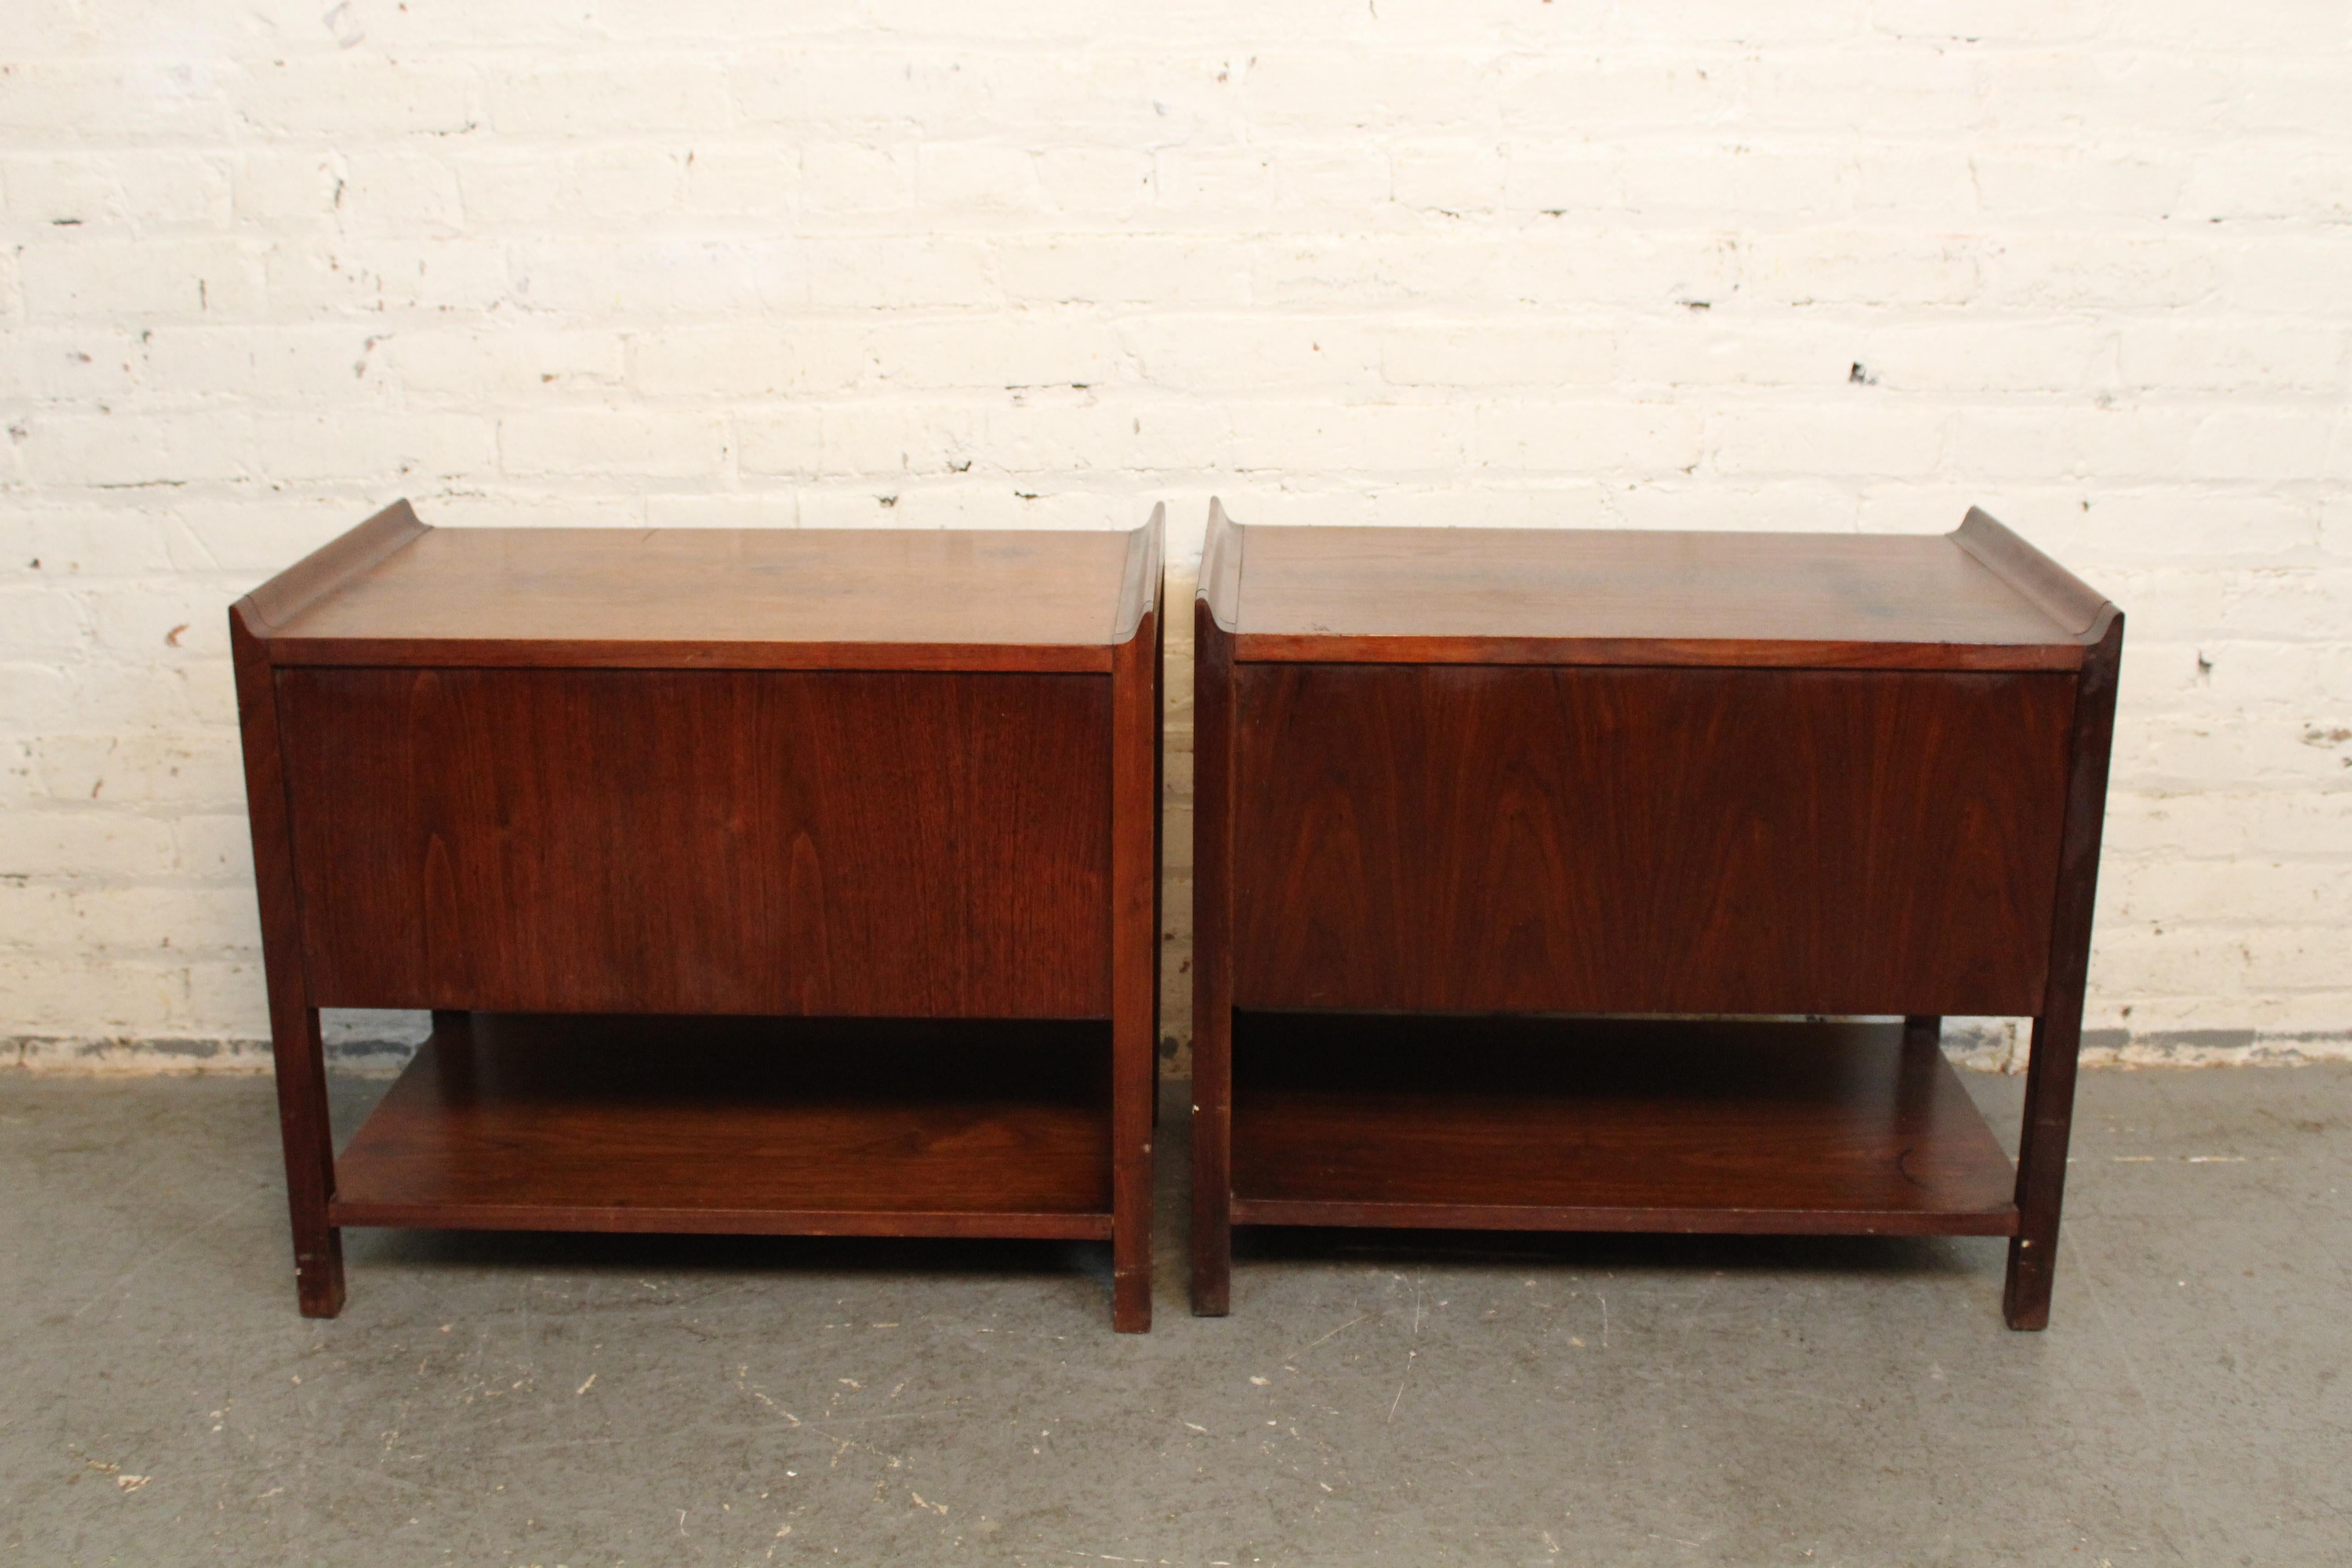 Carved Vintage American Walnut + Leather Nightstands by Dillingham For Sale